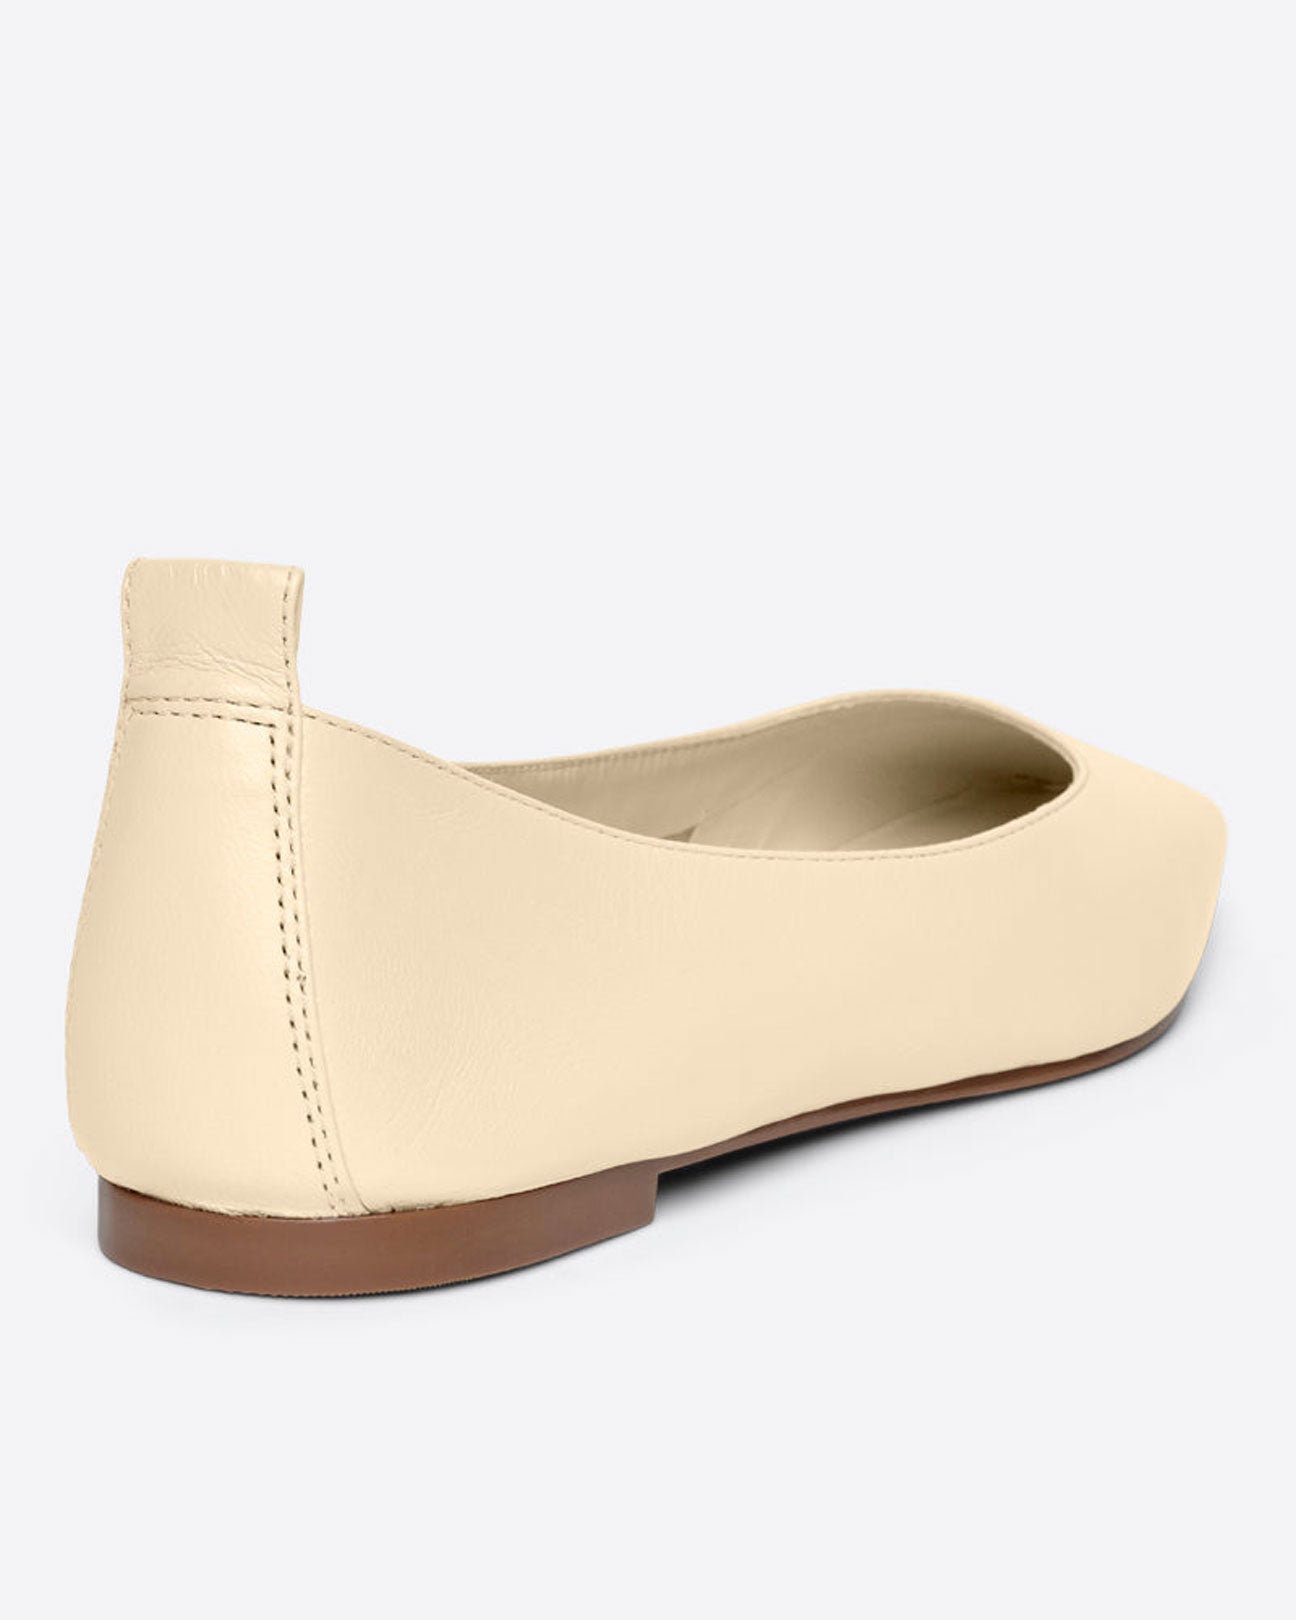 INTENTIONALLY BLANK Image Natural Sole Flat in Eggnog available at Lahn.shop